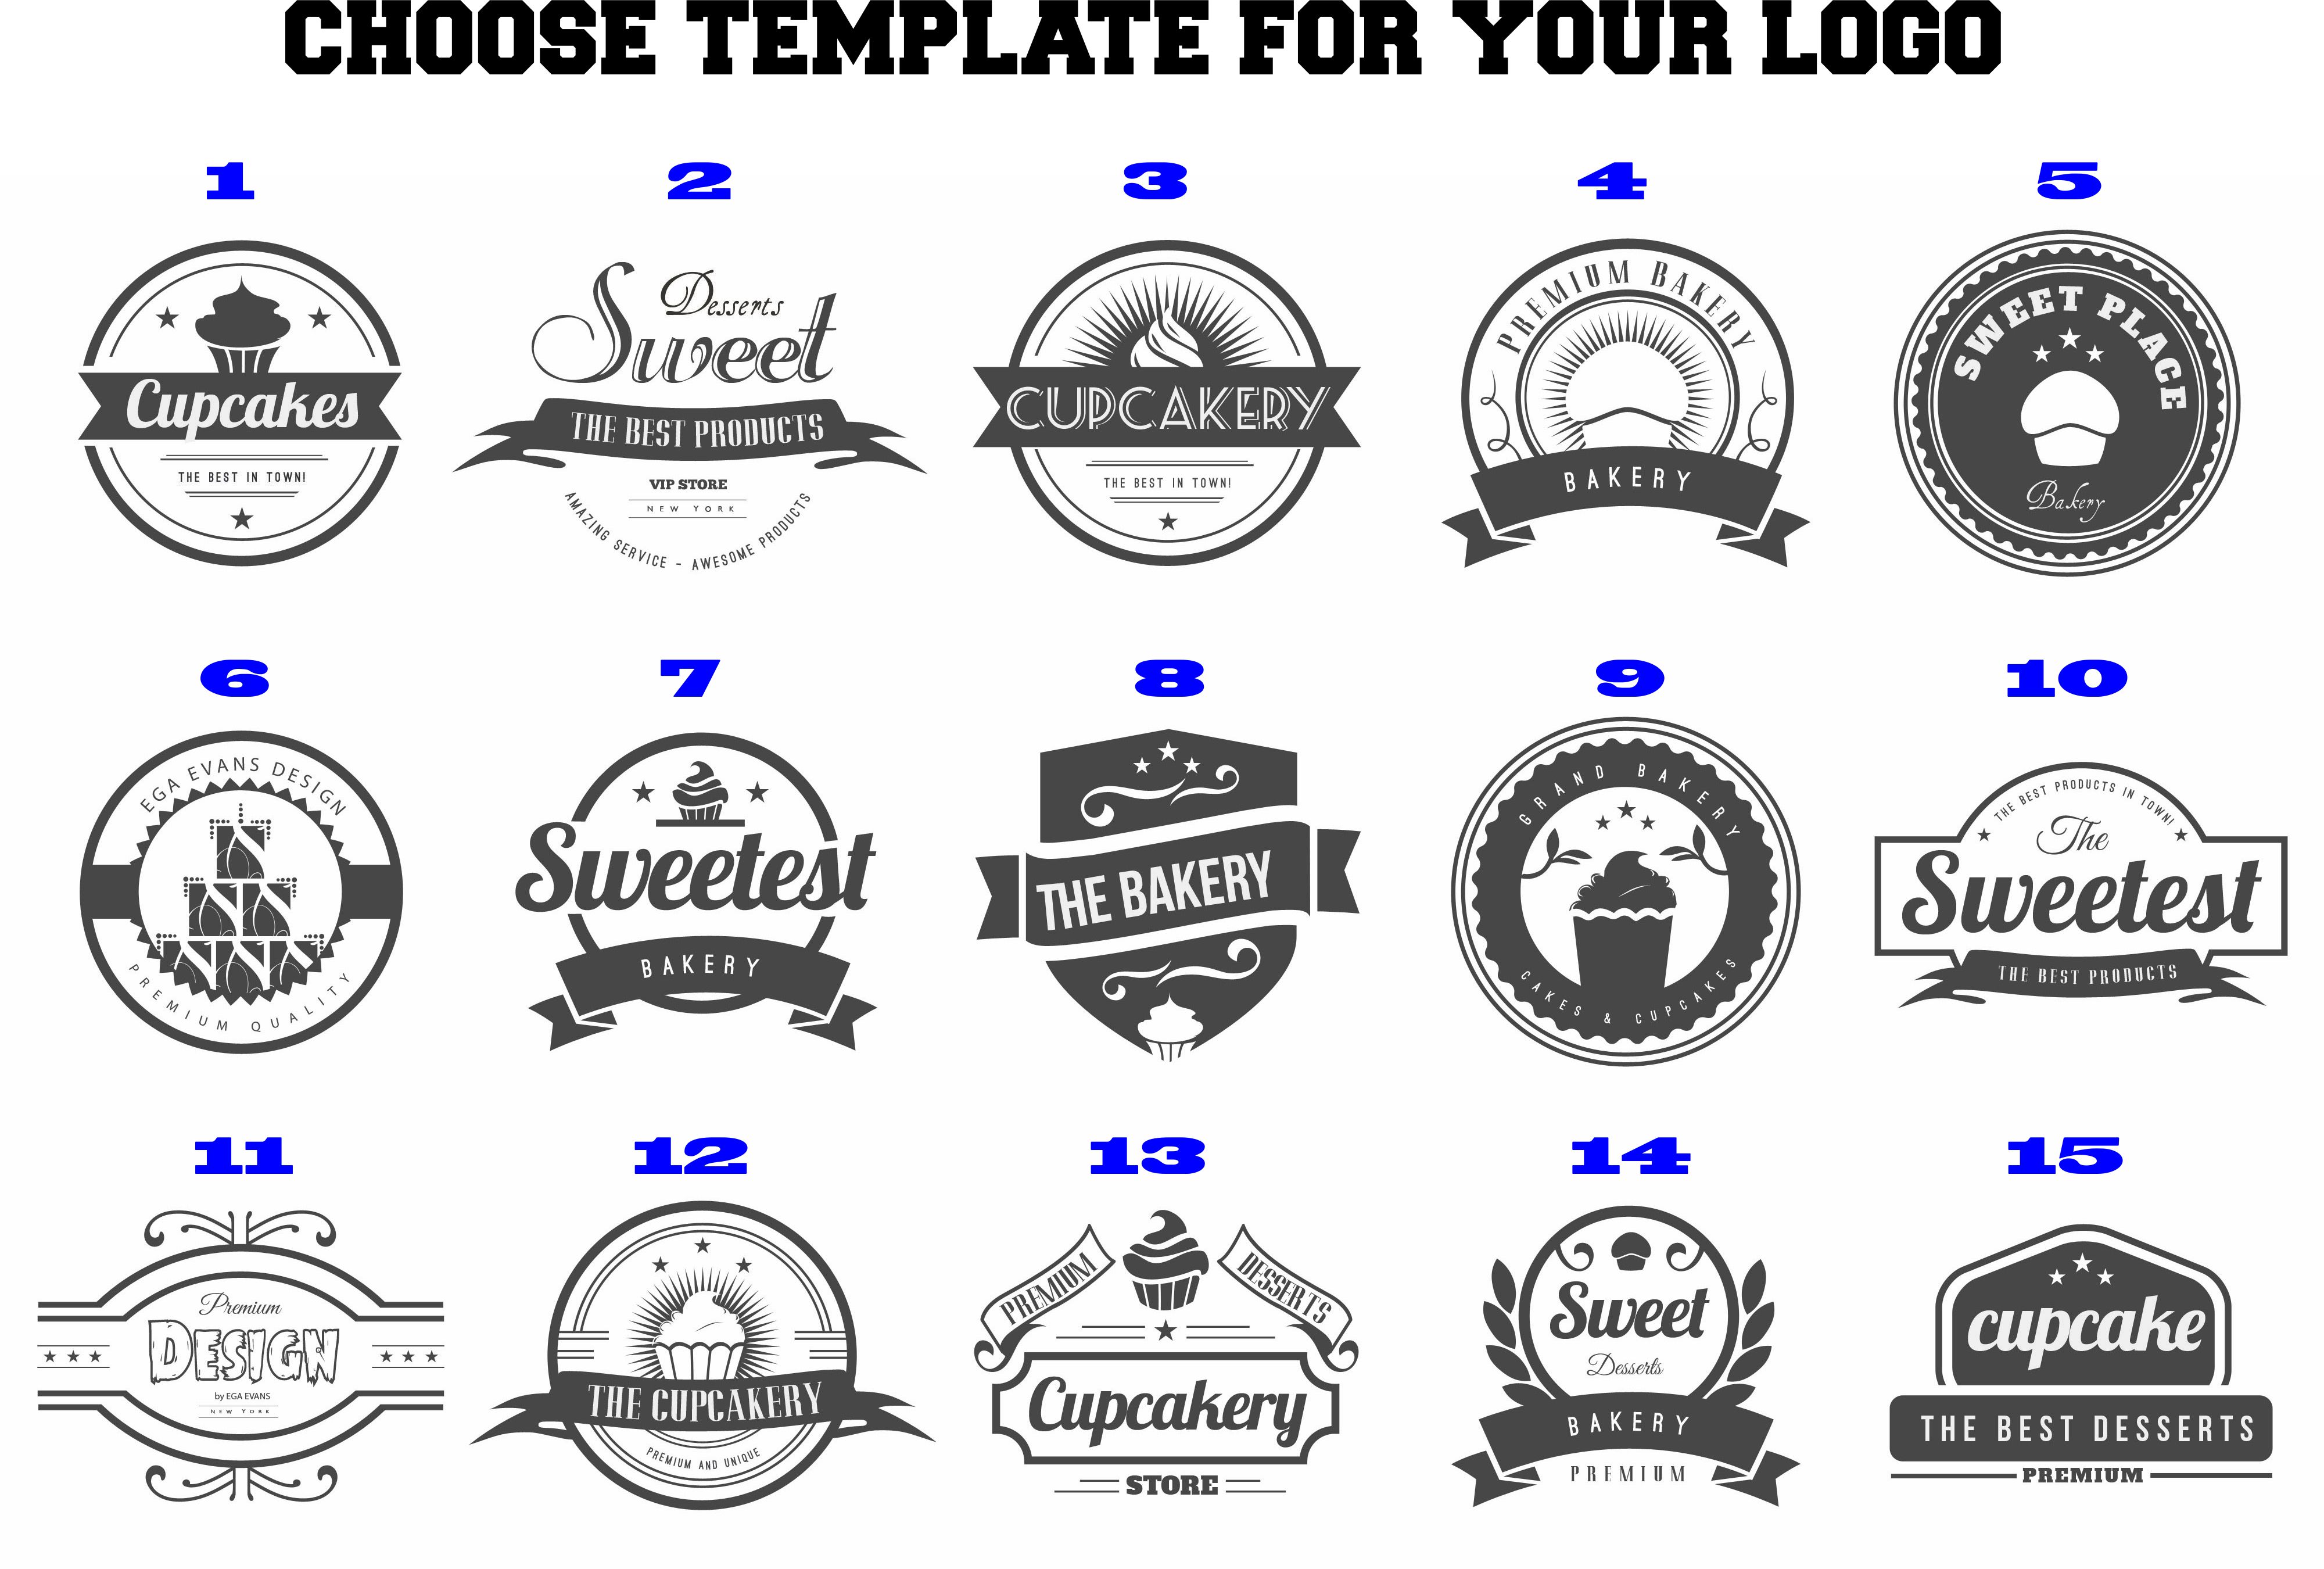 I will design awesome logo badge for you